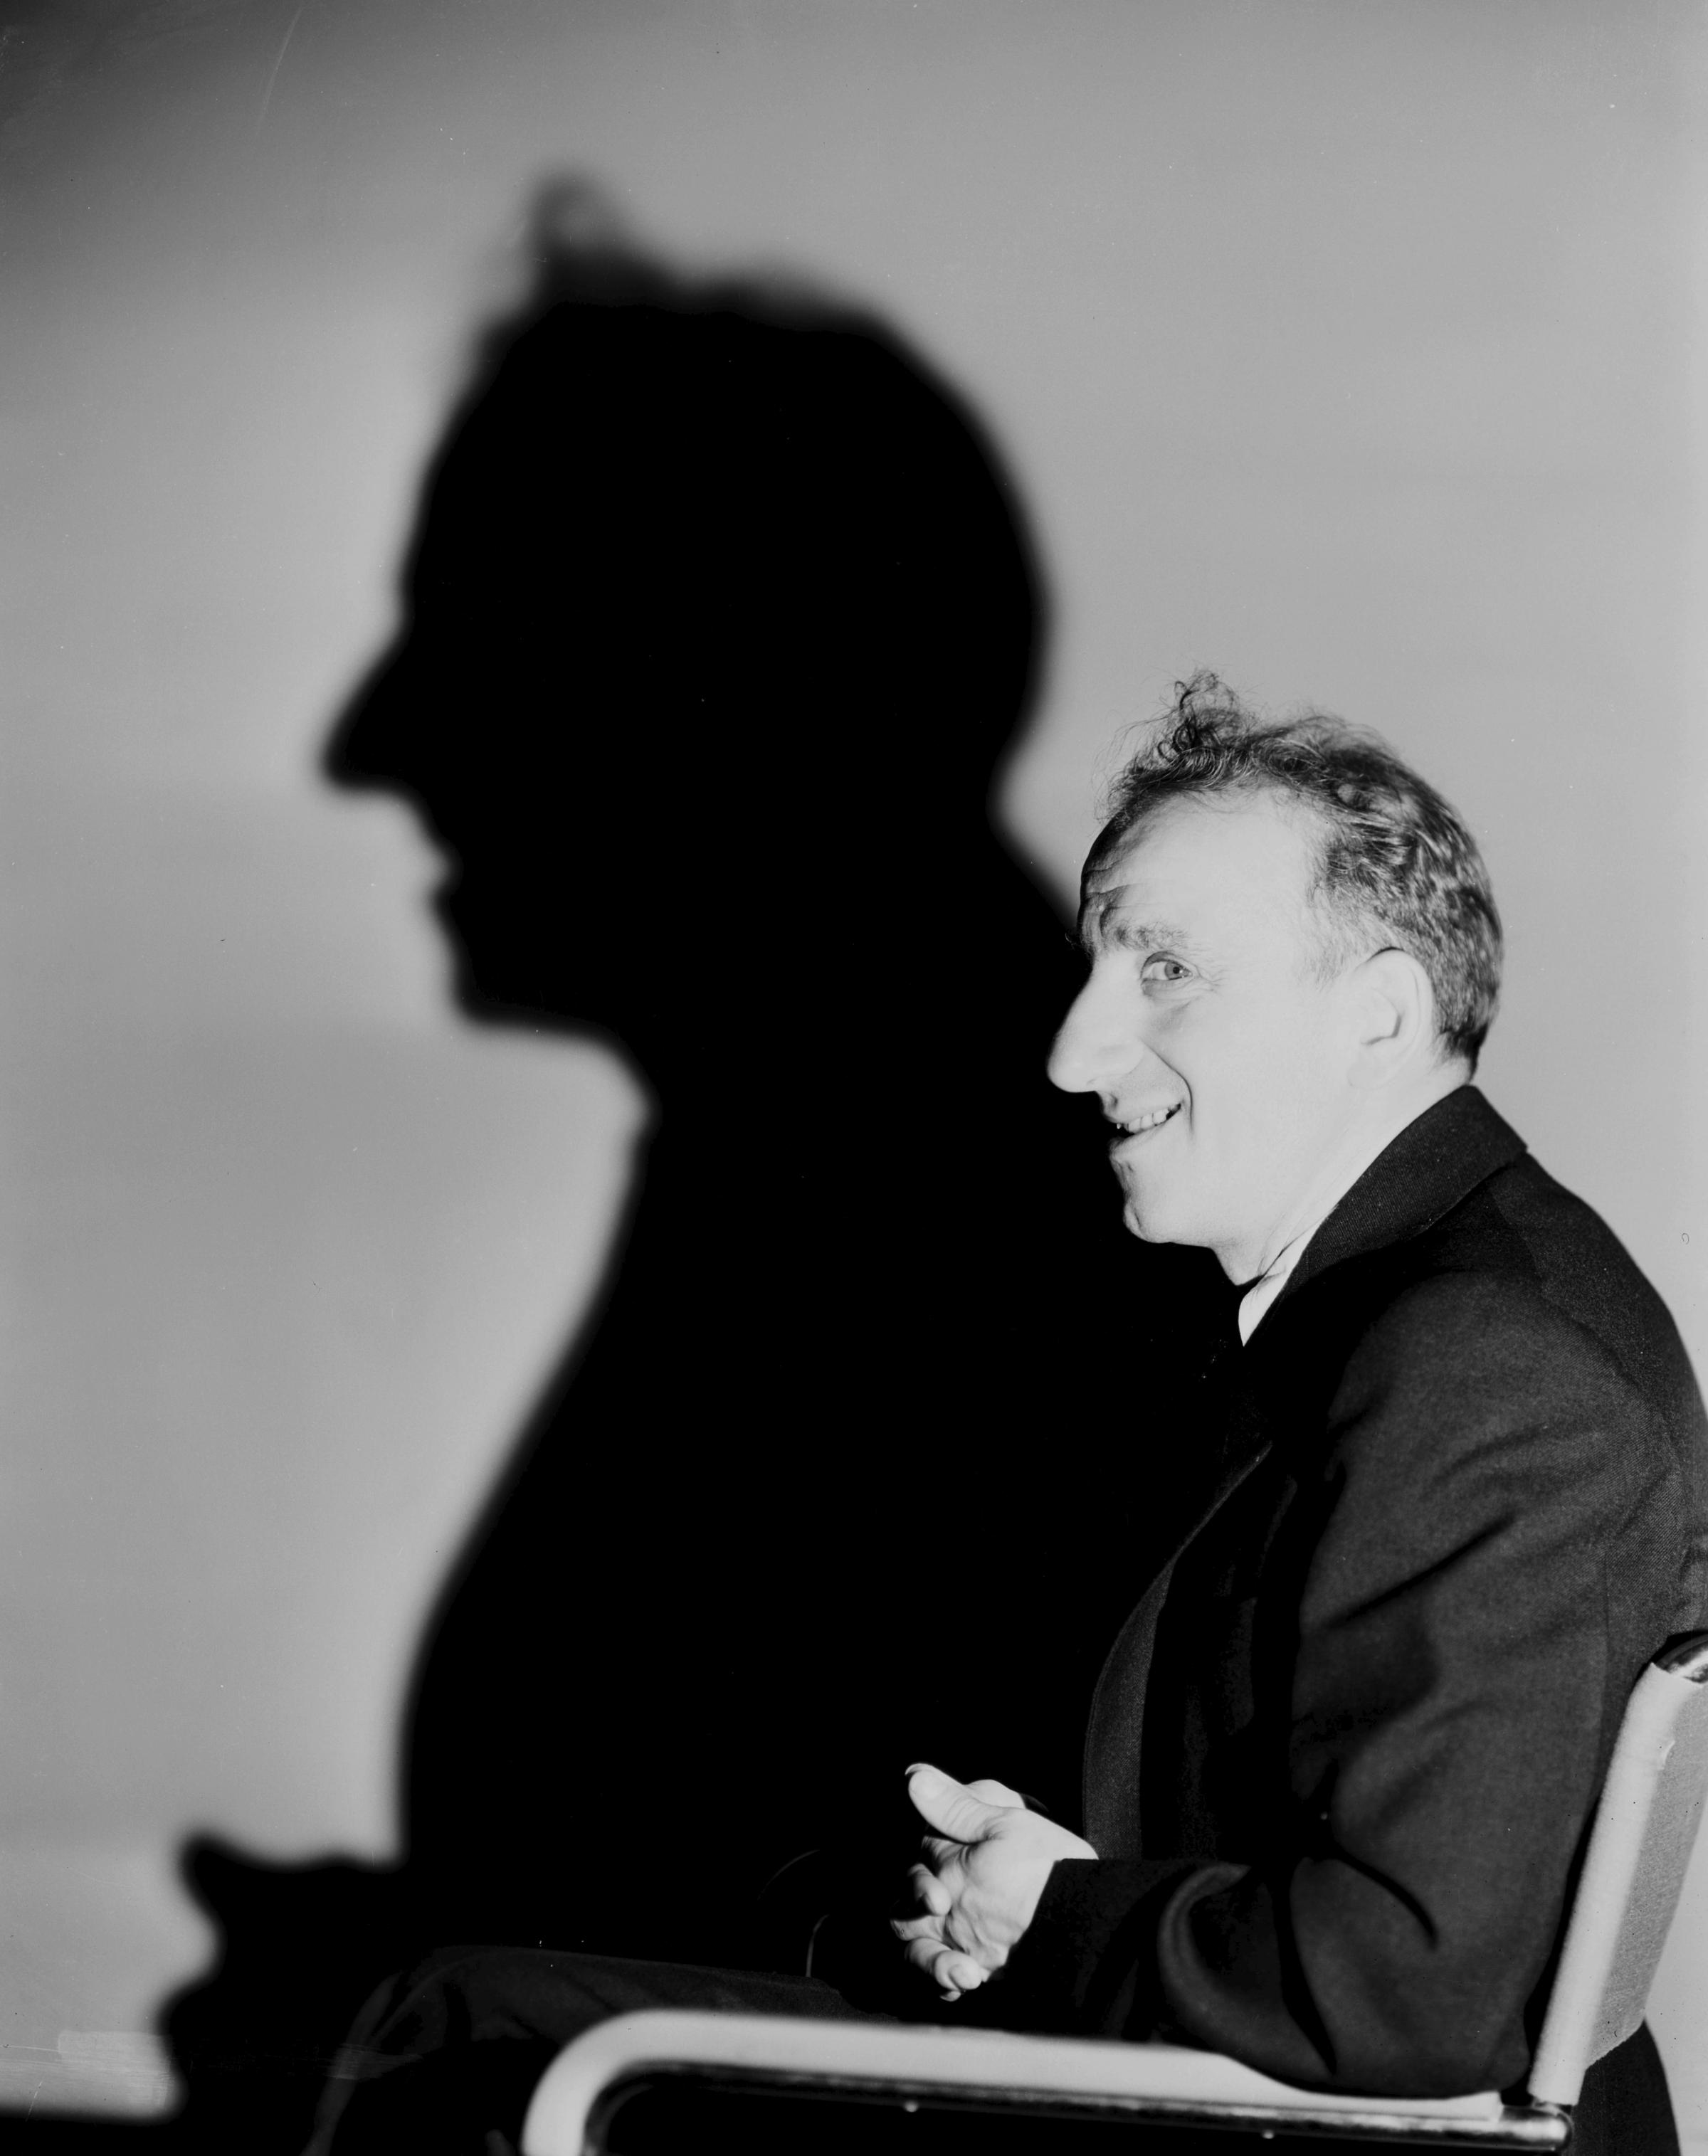 Portrait of actor Jimmy Durante (1893-1980) with his shadow, for MGM Studios, June 28th 1933. (Photo by Clarence Sinclair Bull via John Kobal Foundation/Getty Images).